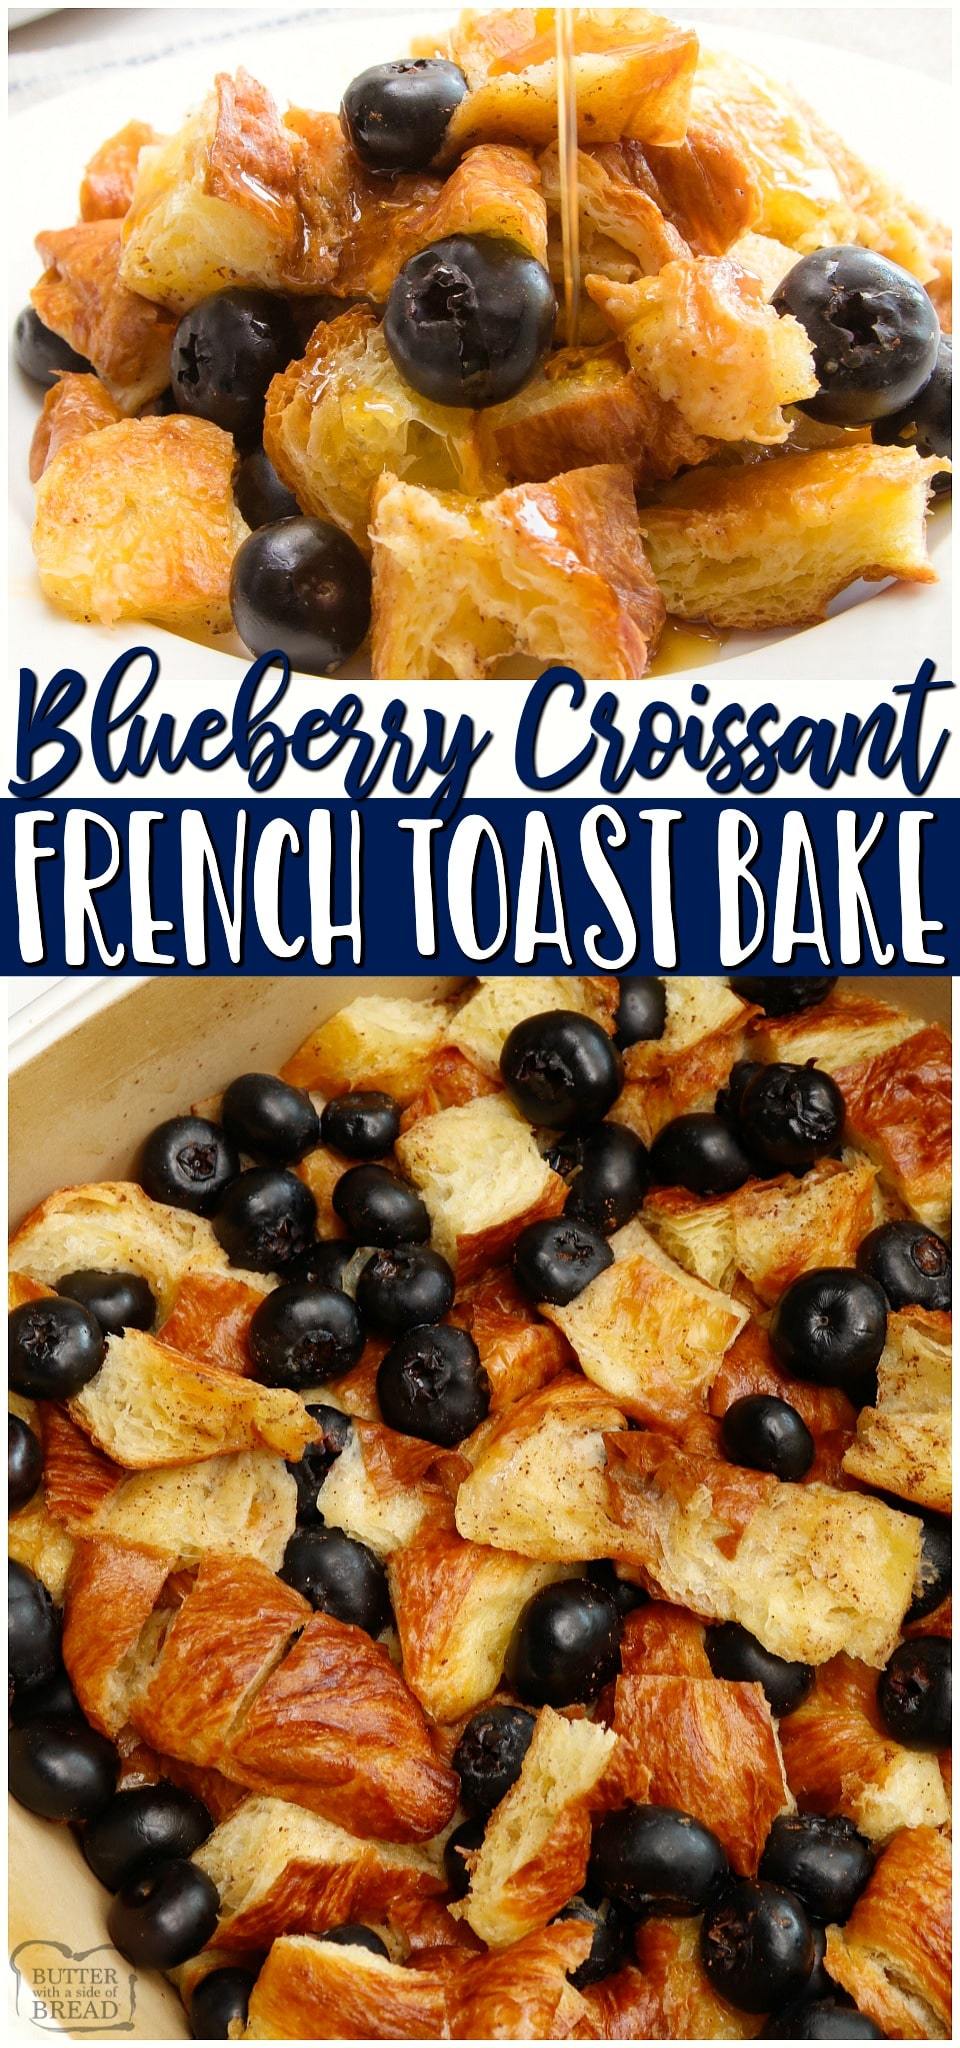 Blueberry Croissant French Toast Bake is a buttery, fluffy, and flavorful breakfast recipe. With 5 ingredients & a few simple steps, you can have an Easy Croissant French Toast Casserole in no time! #breakfast #frenchtoast #bake #blueberry #croissant #easyrecipe from BUTTER WITH A SIDE OF BREAD